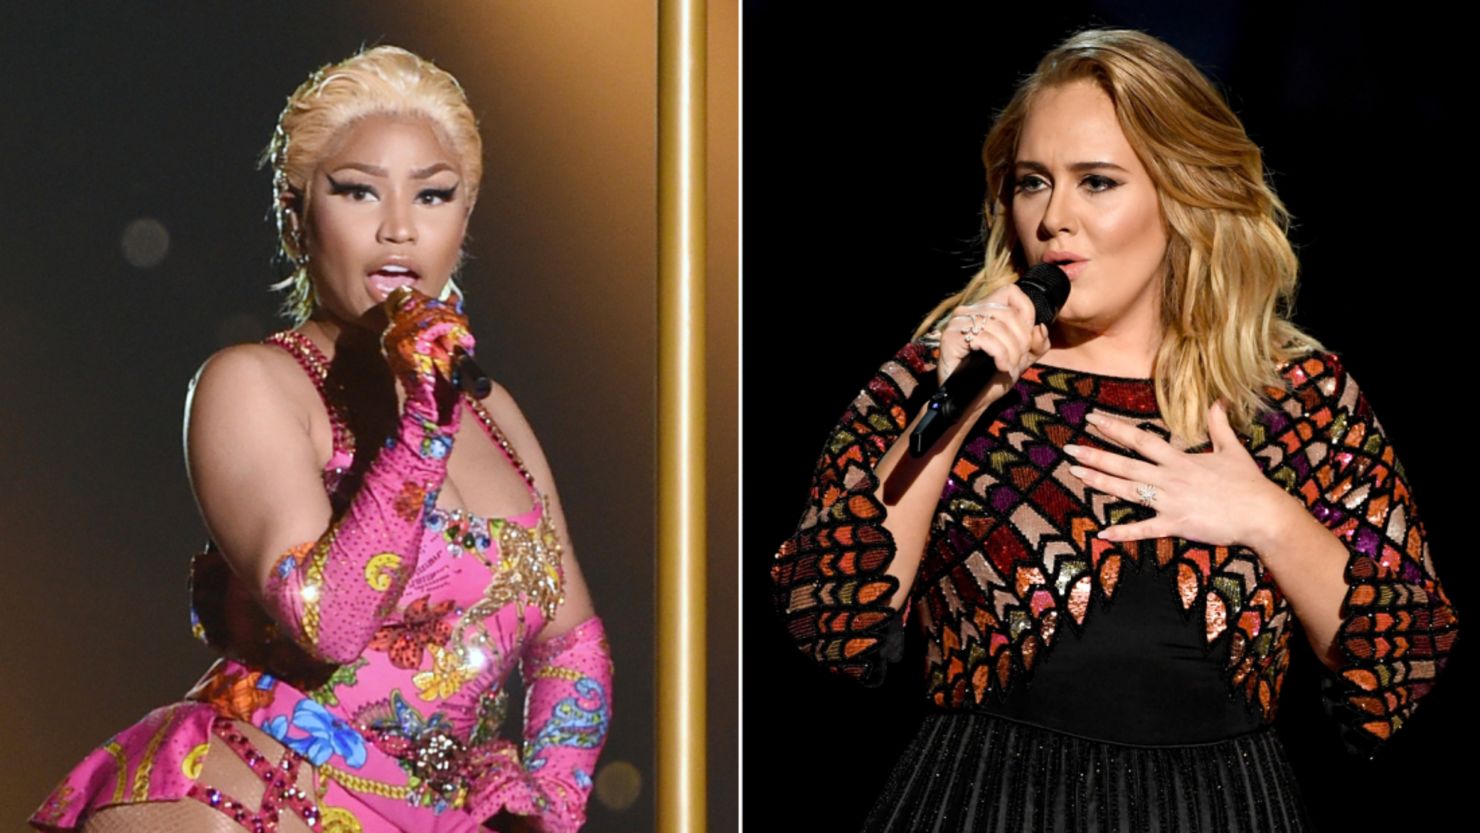 Nicki Minaj and Adele have teamed up on a new song.